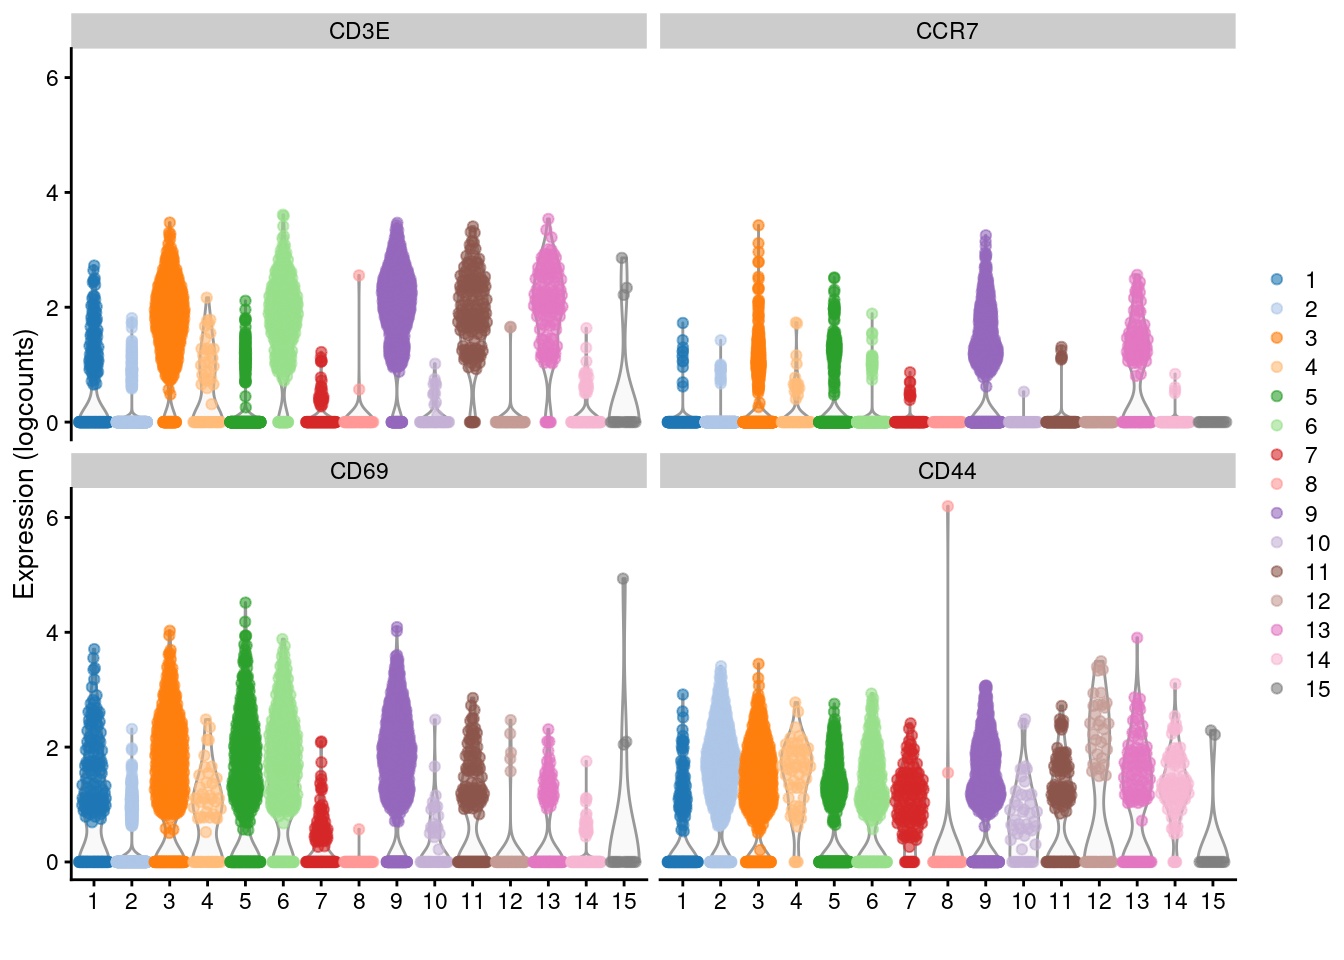 Distribution of log-normalized expression values for several T cell markers within each cluster in the 10X PBMC dataset. Each cluster is color-coded for convenience.